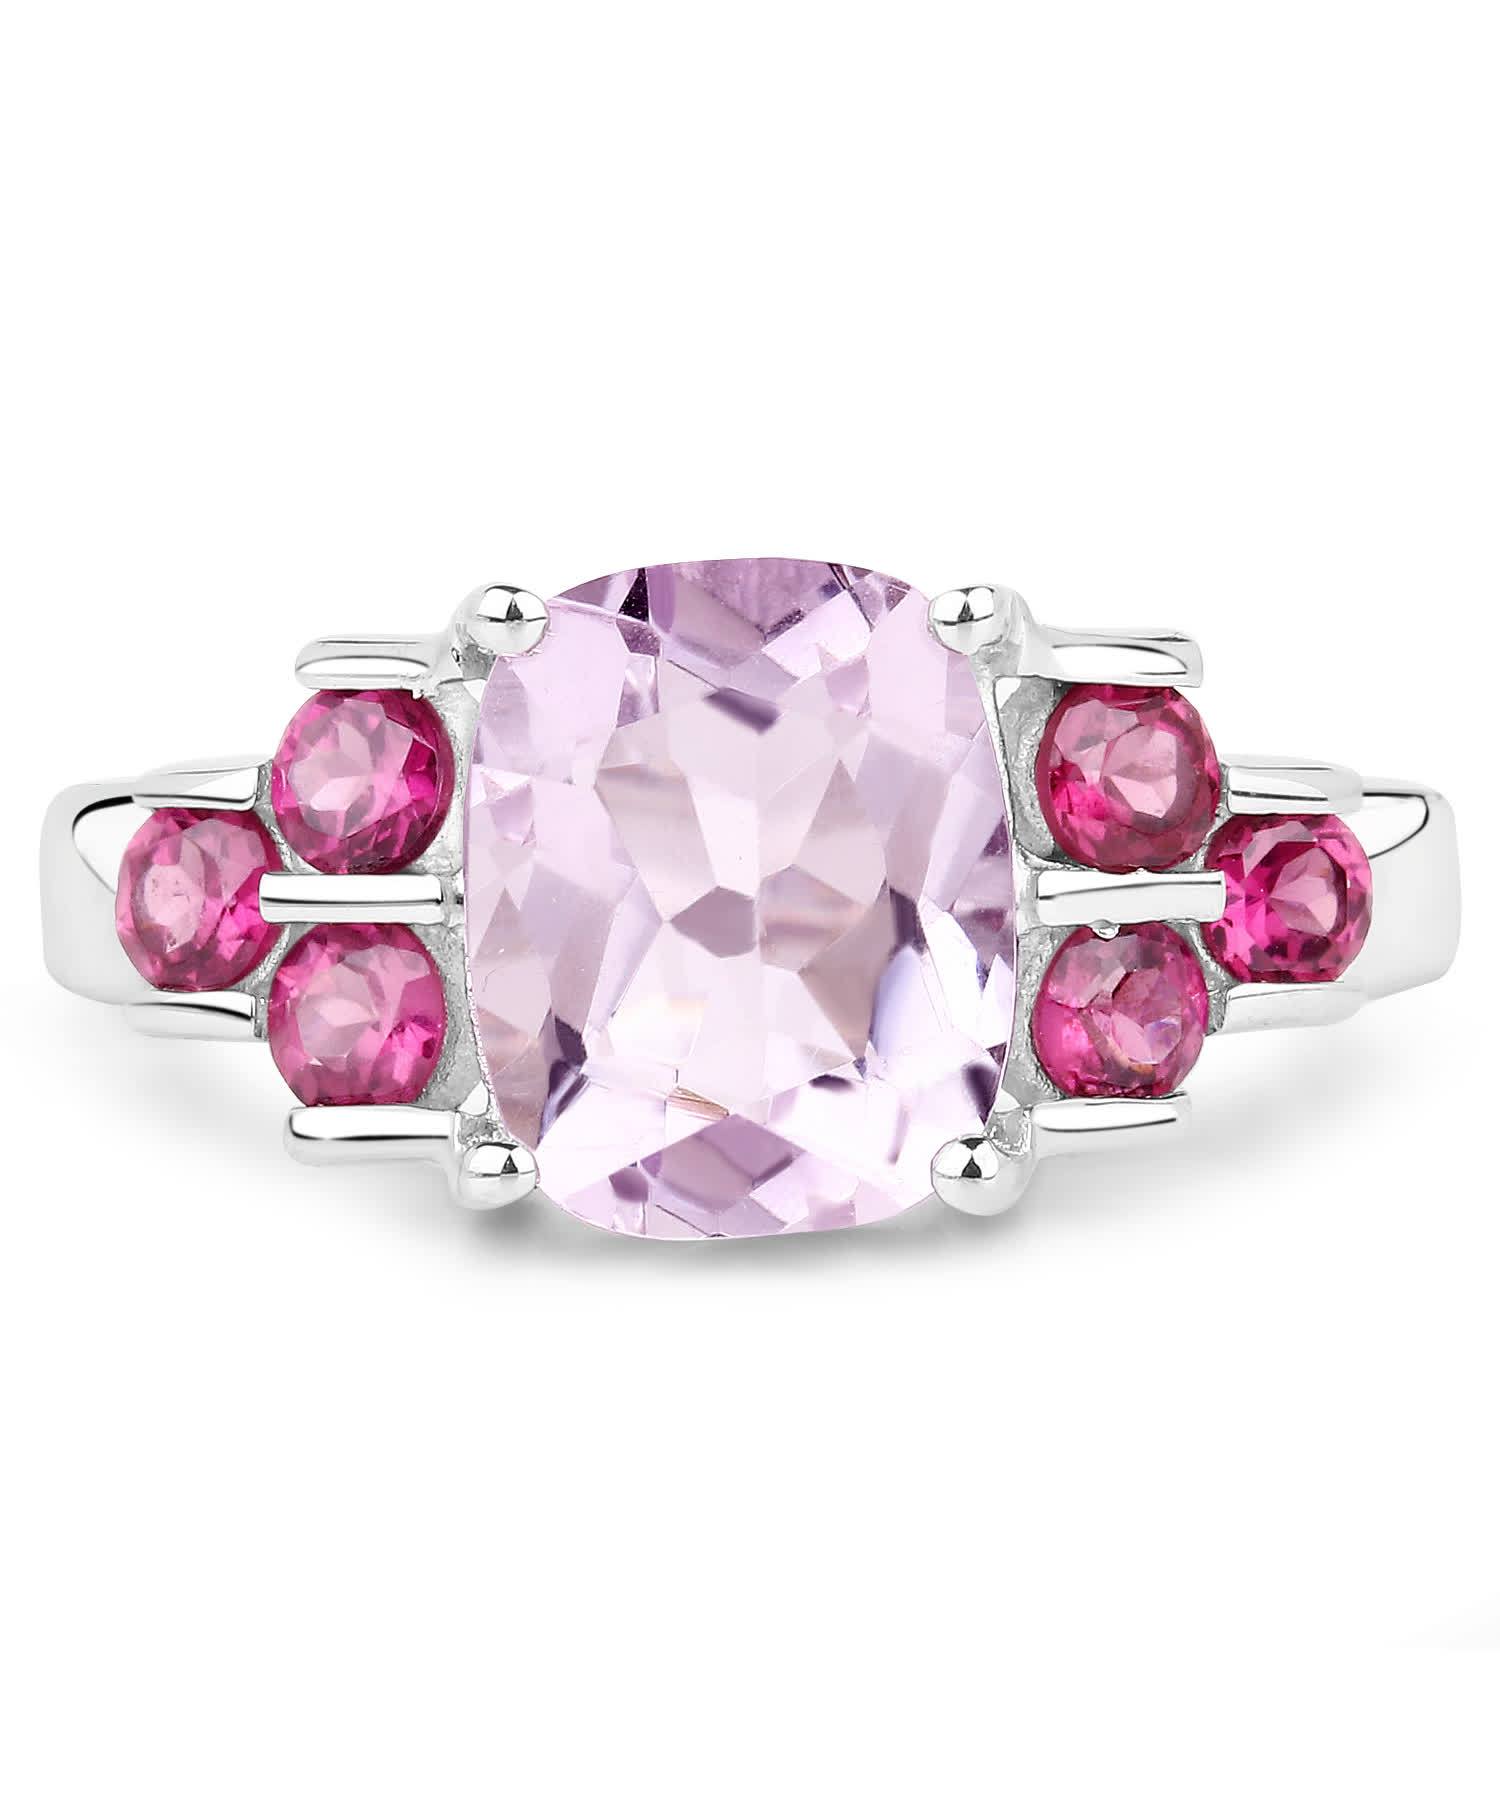 2.83ctw Natural Amethyst and Rhodolite Garnet Rhodium Plated 925 Sterling Silver Right Hand Ring View 3